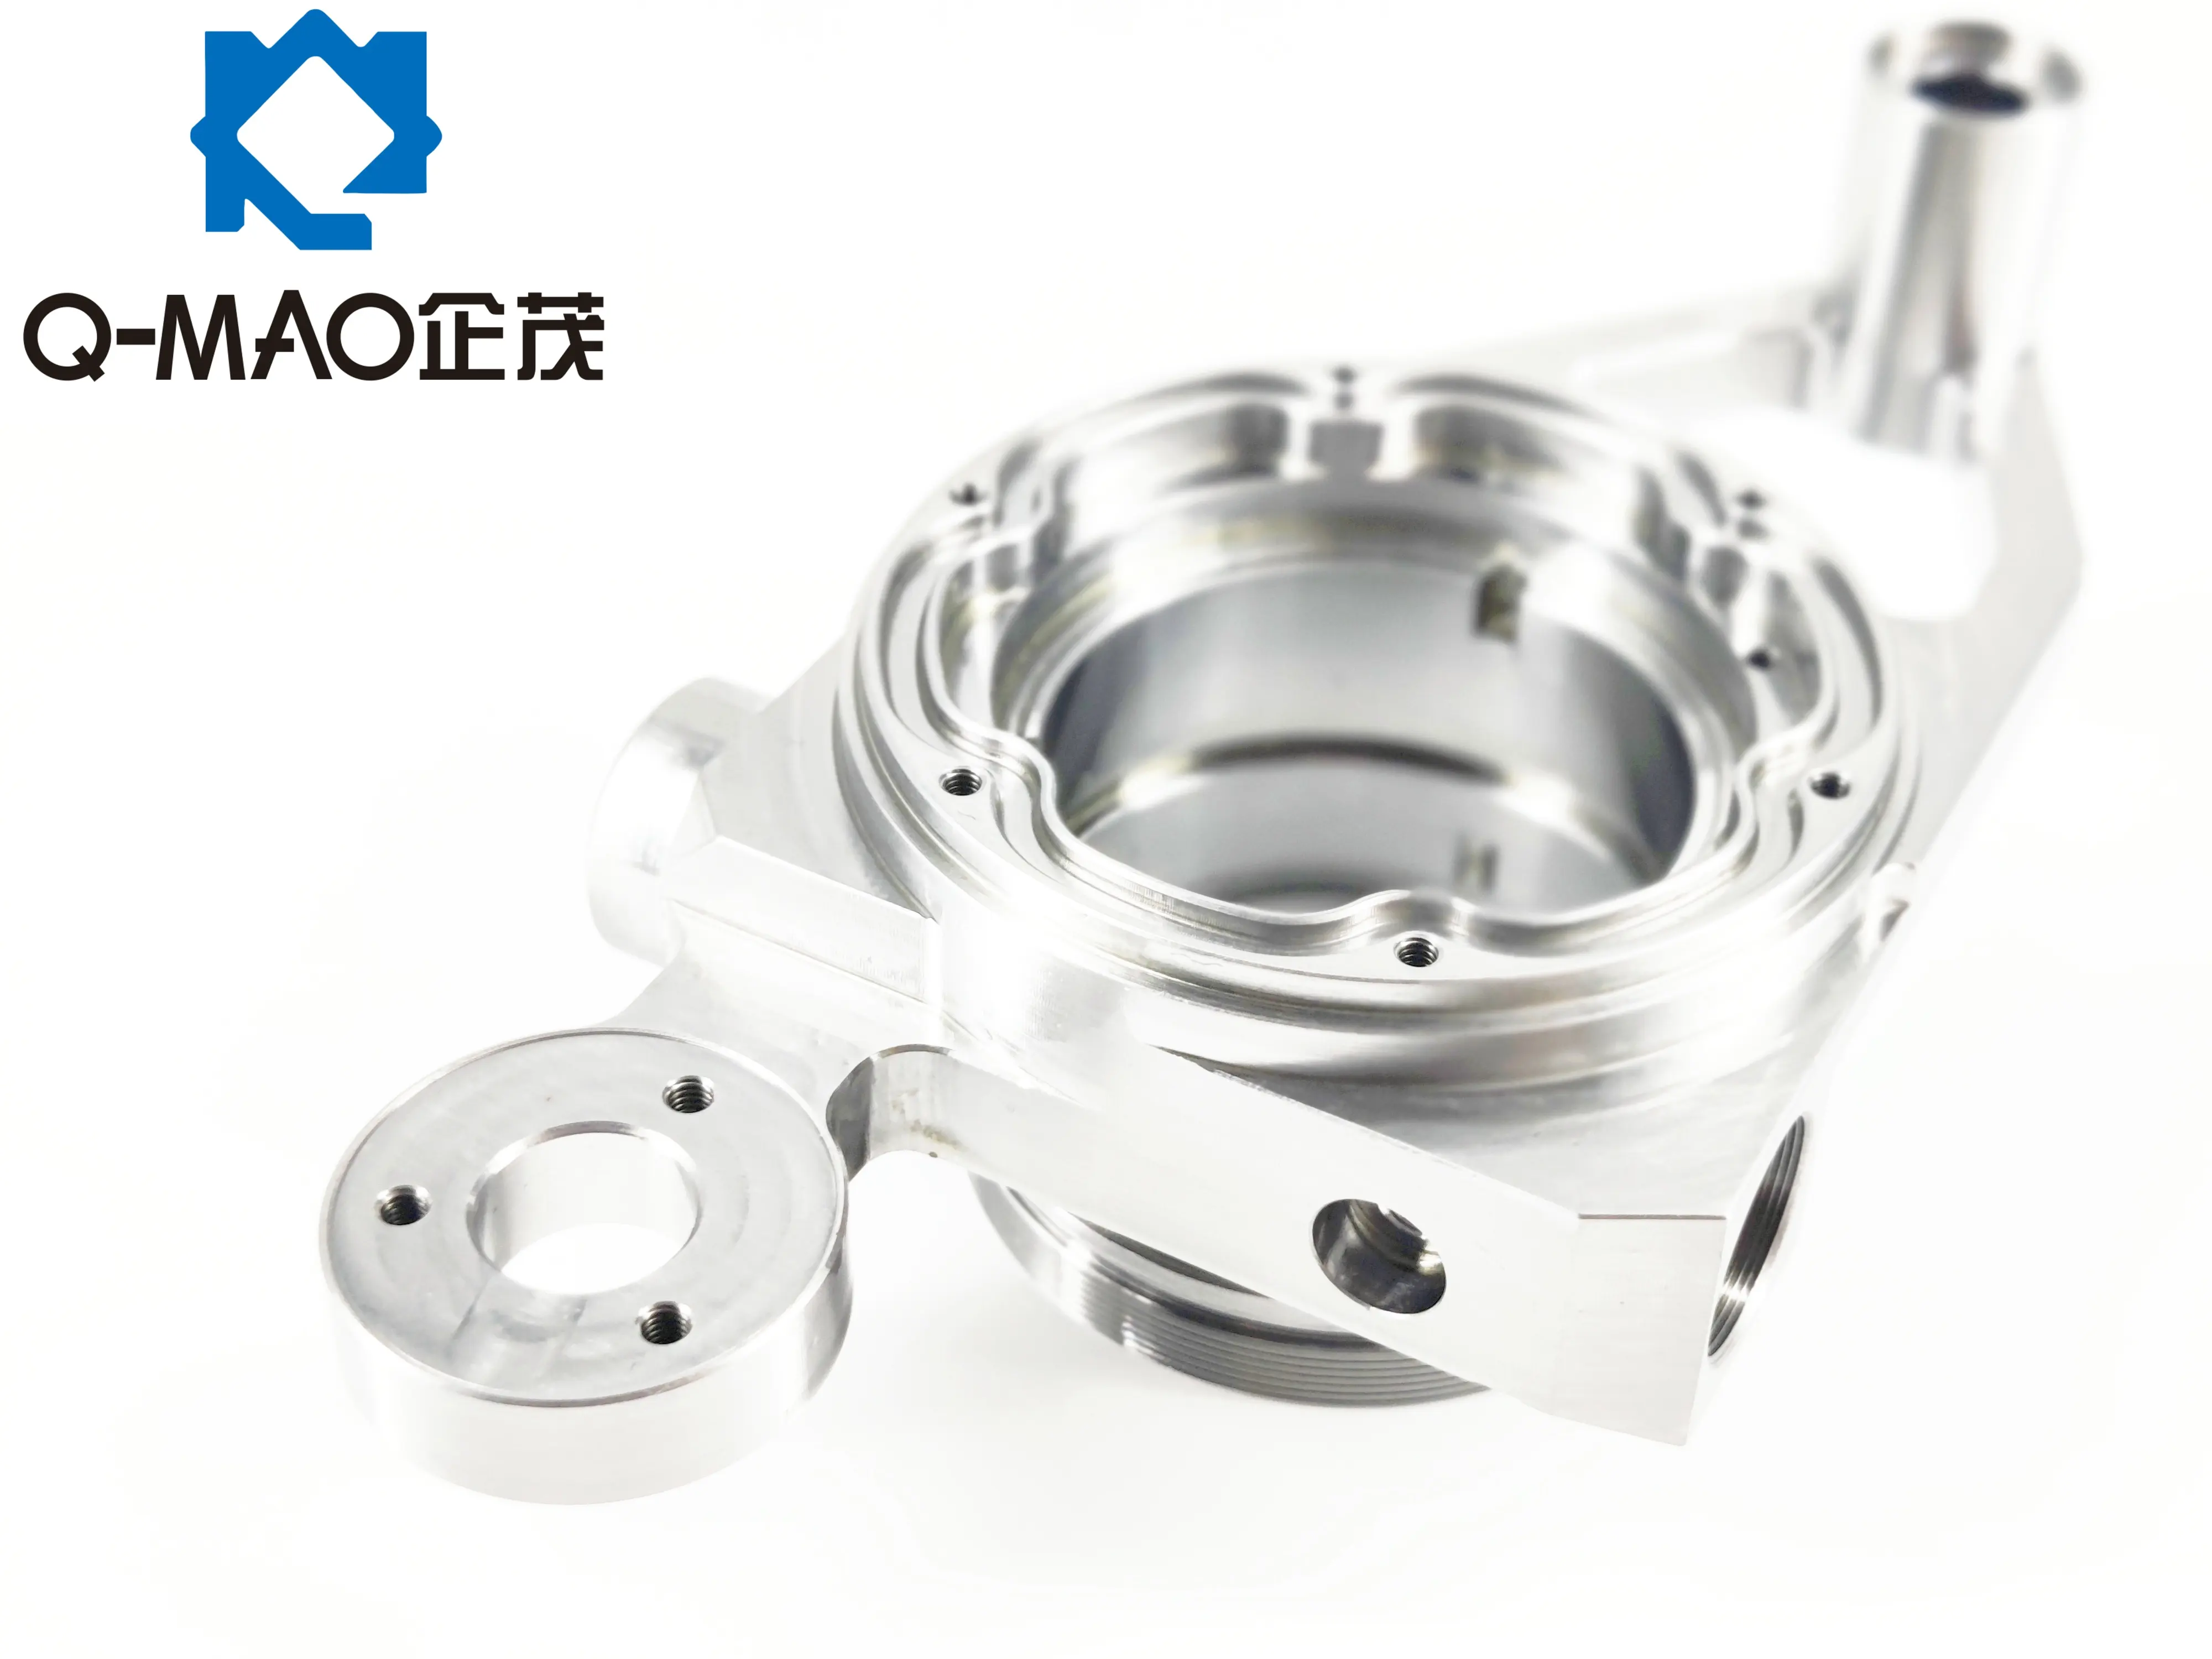 CNC machining of stainless steel partsCustomized high-precision aluminum alloy various special-shaped aluminum boxe